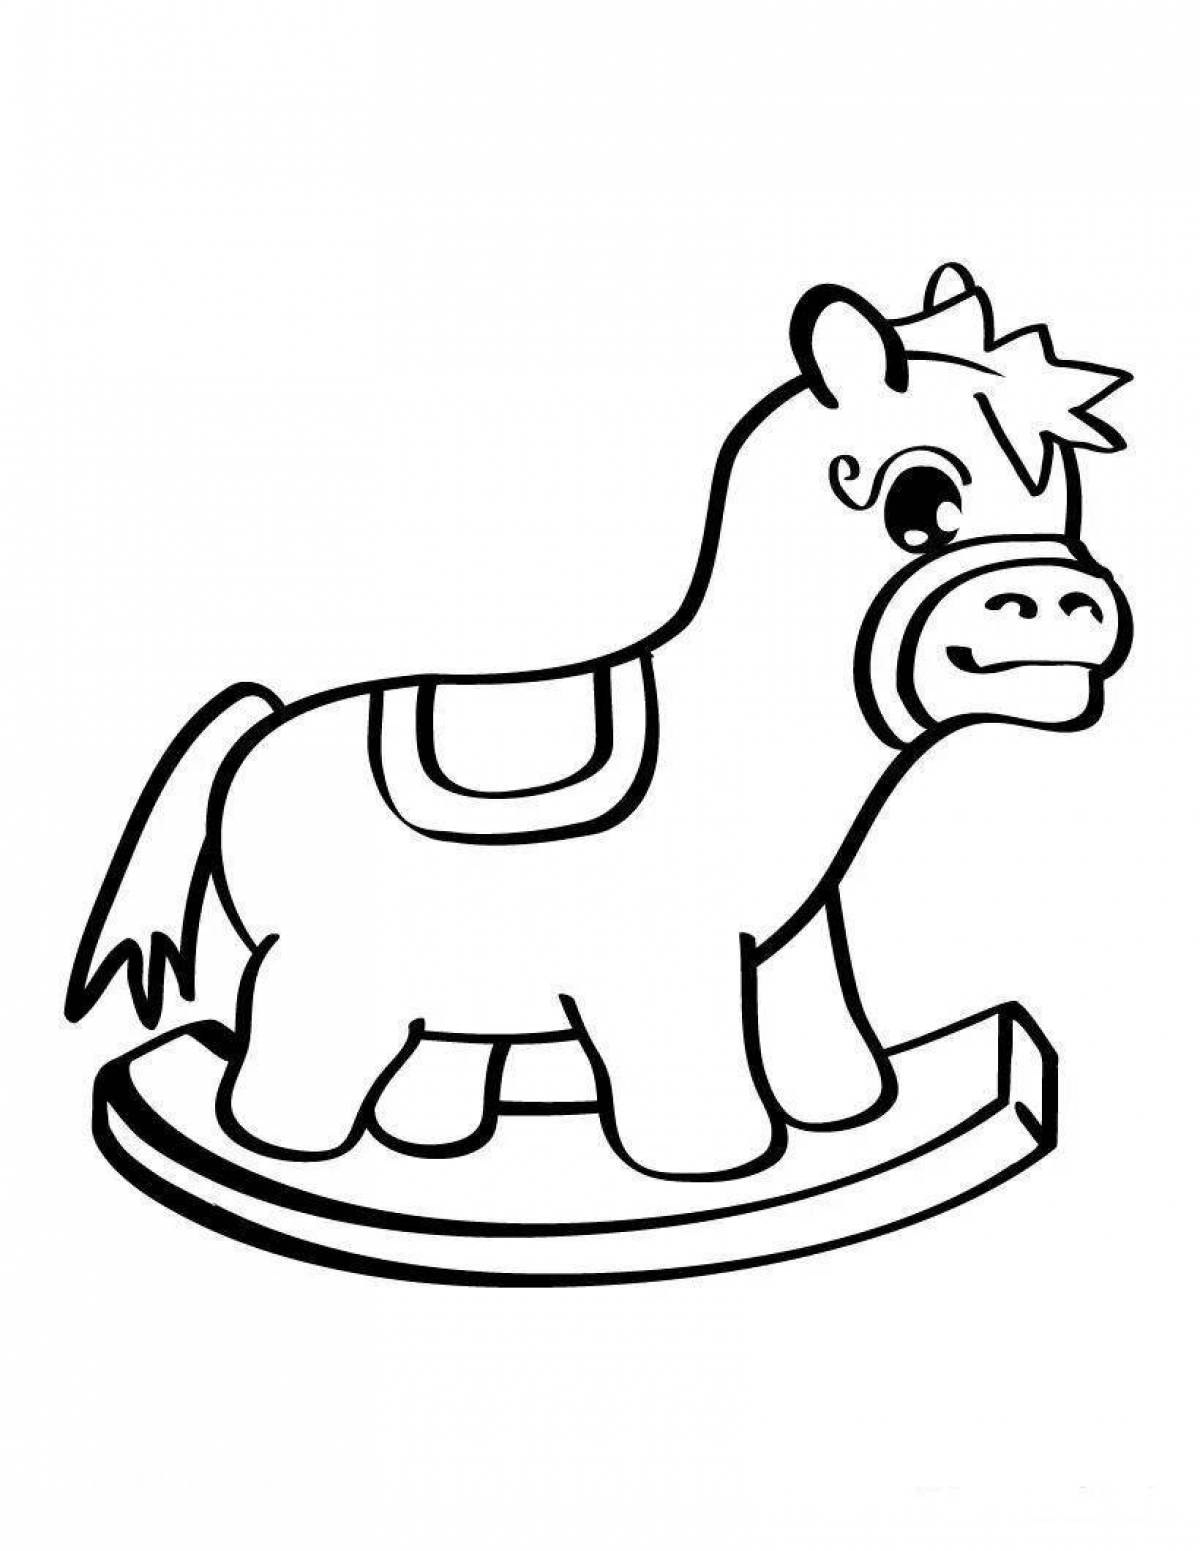 Fancy horse toy coloring book